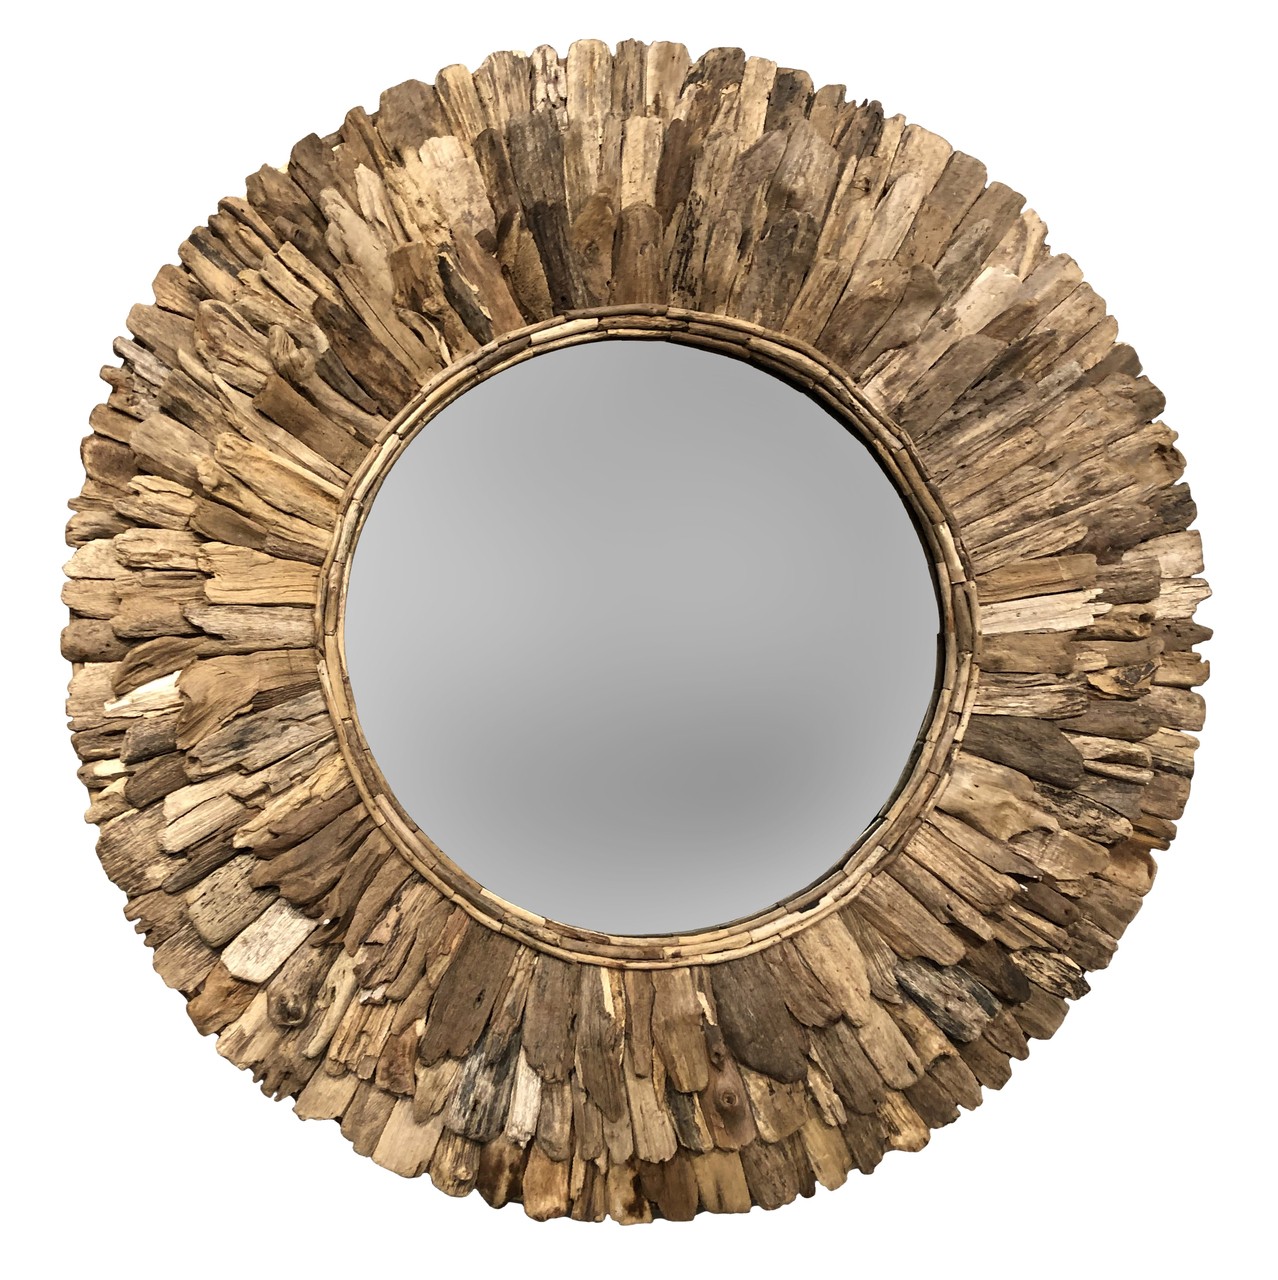 Large round wood chuck mirror 120 cm afd home